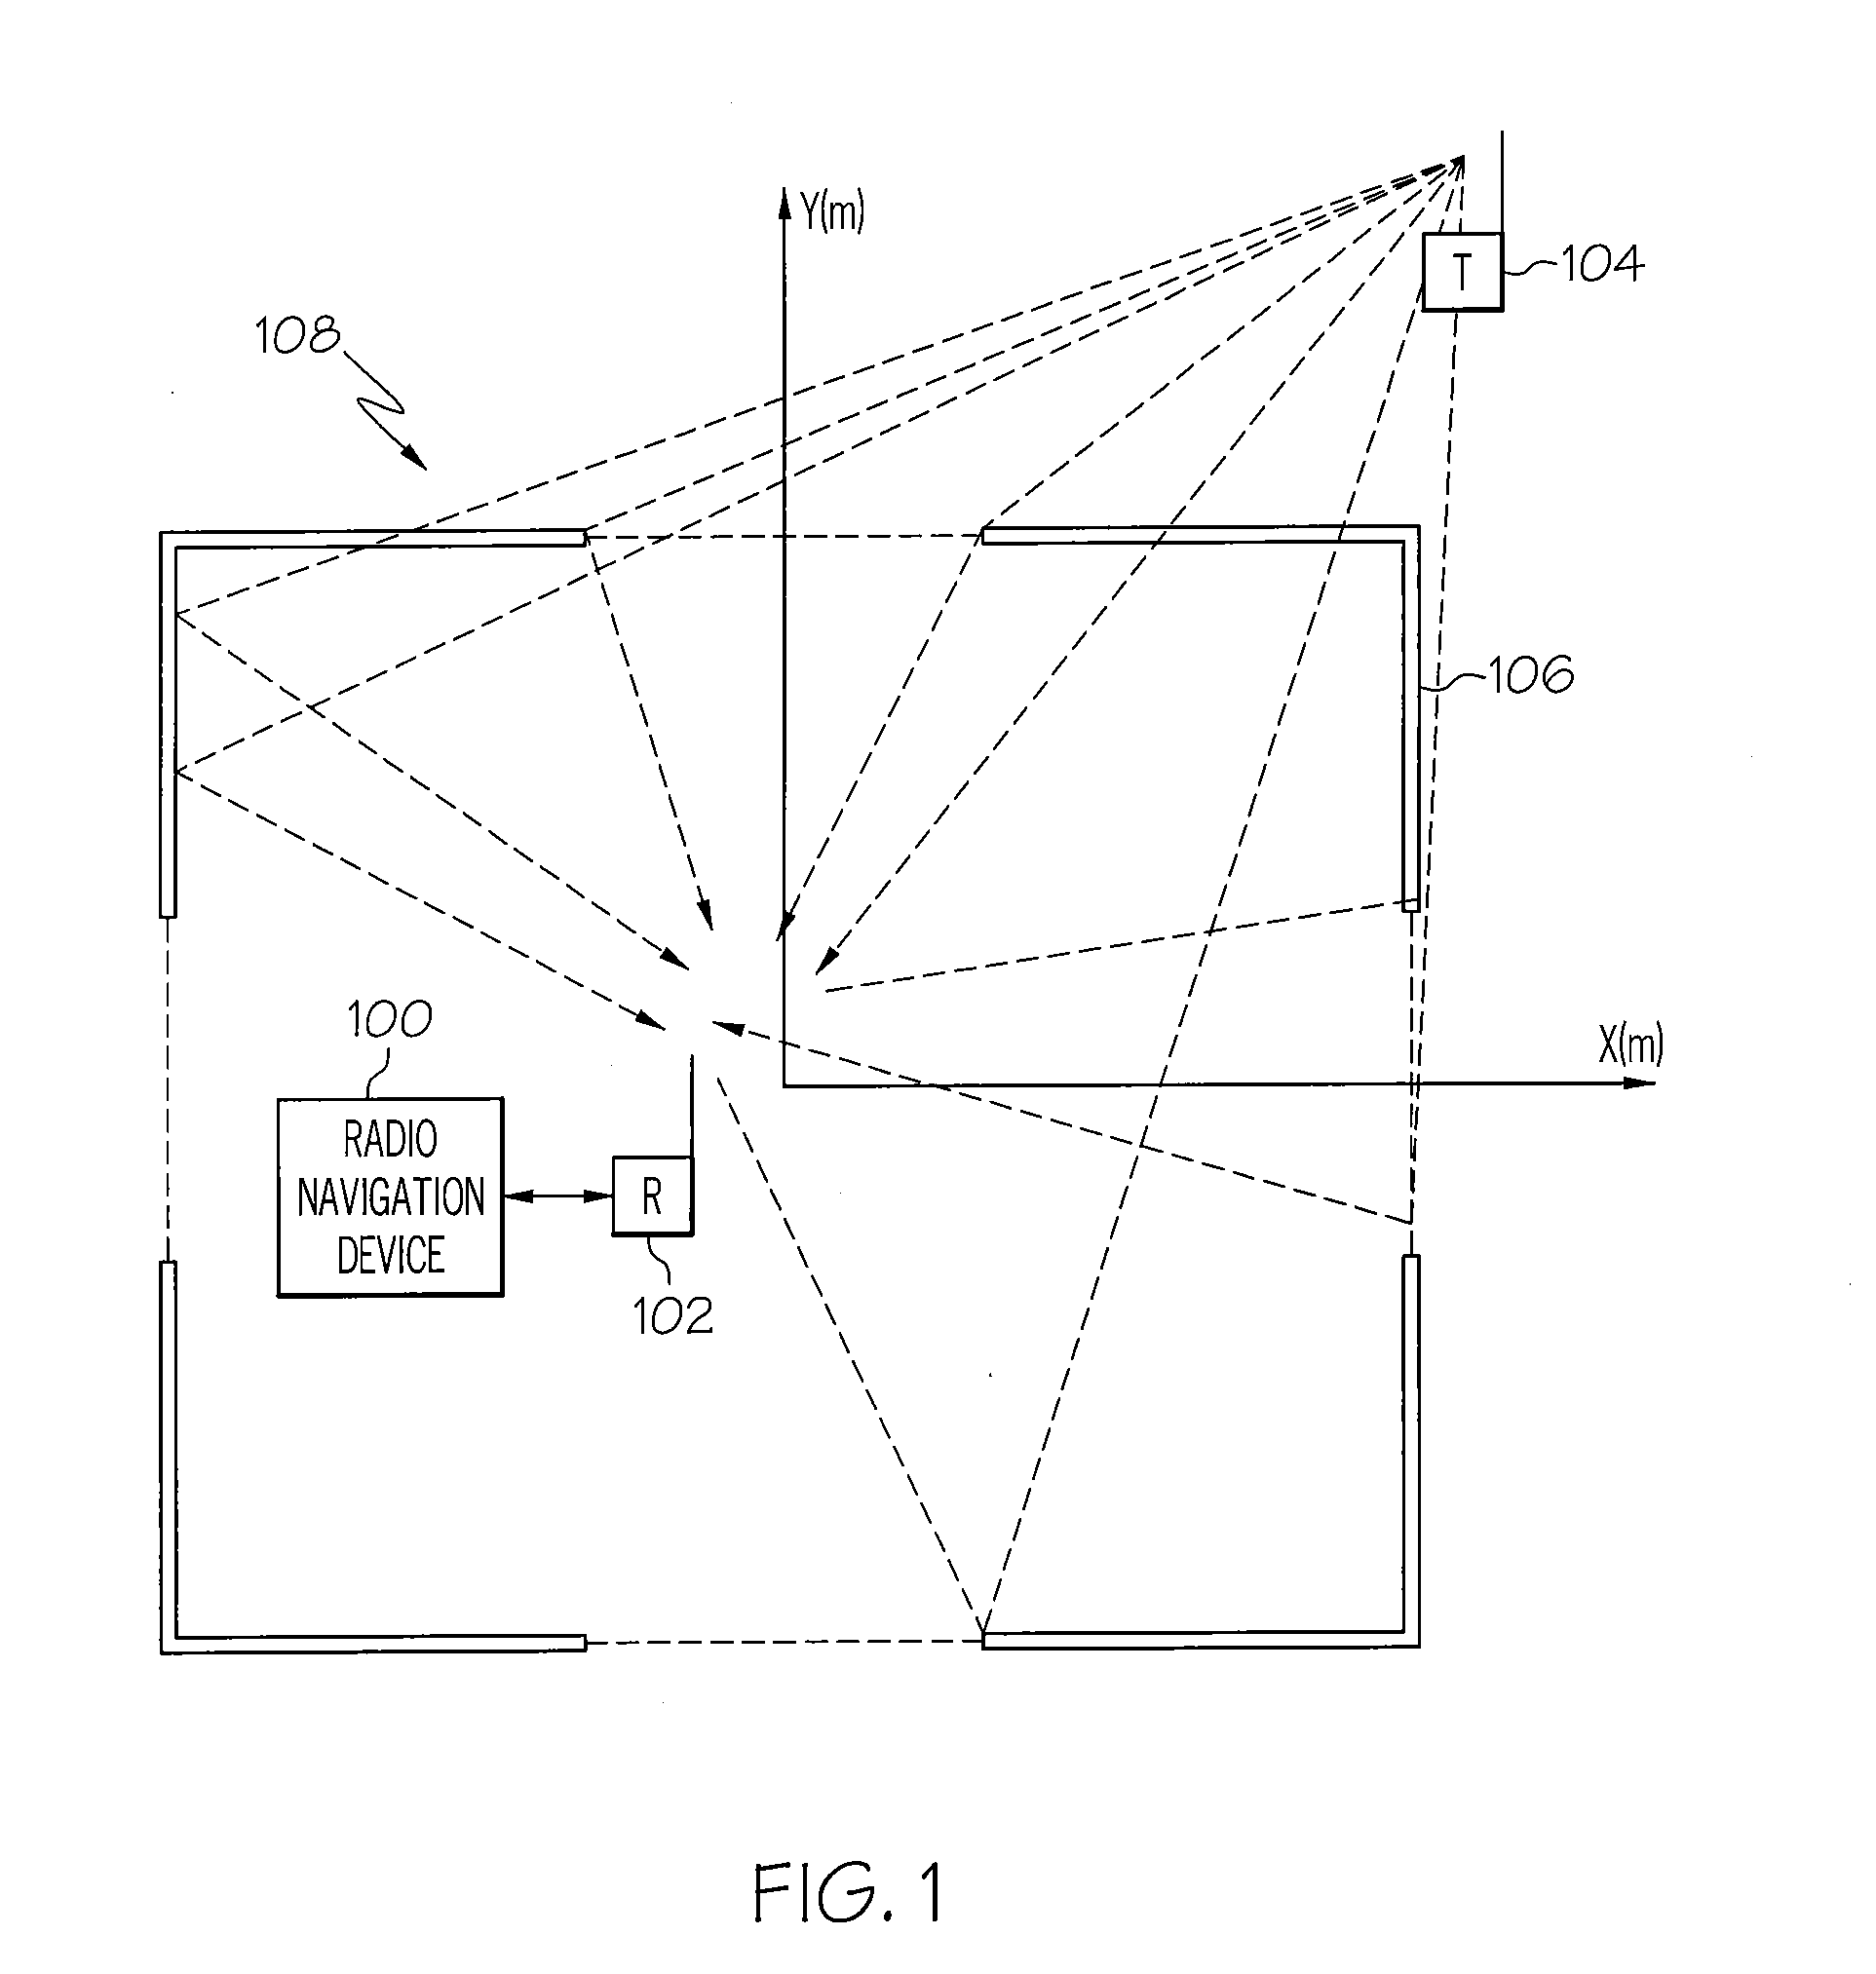 Radio frequency navigation using frequency response matching